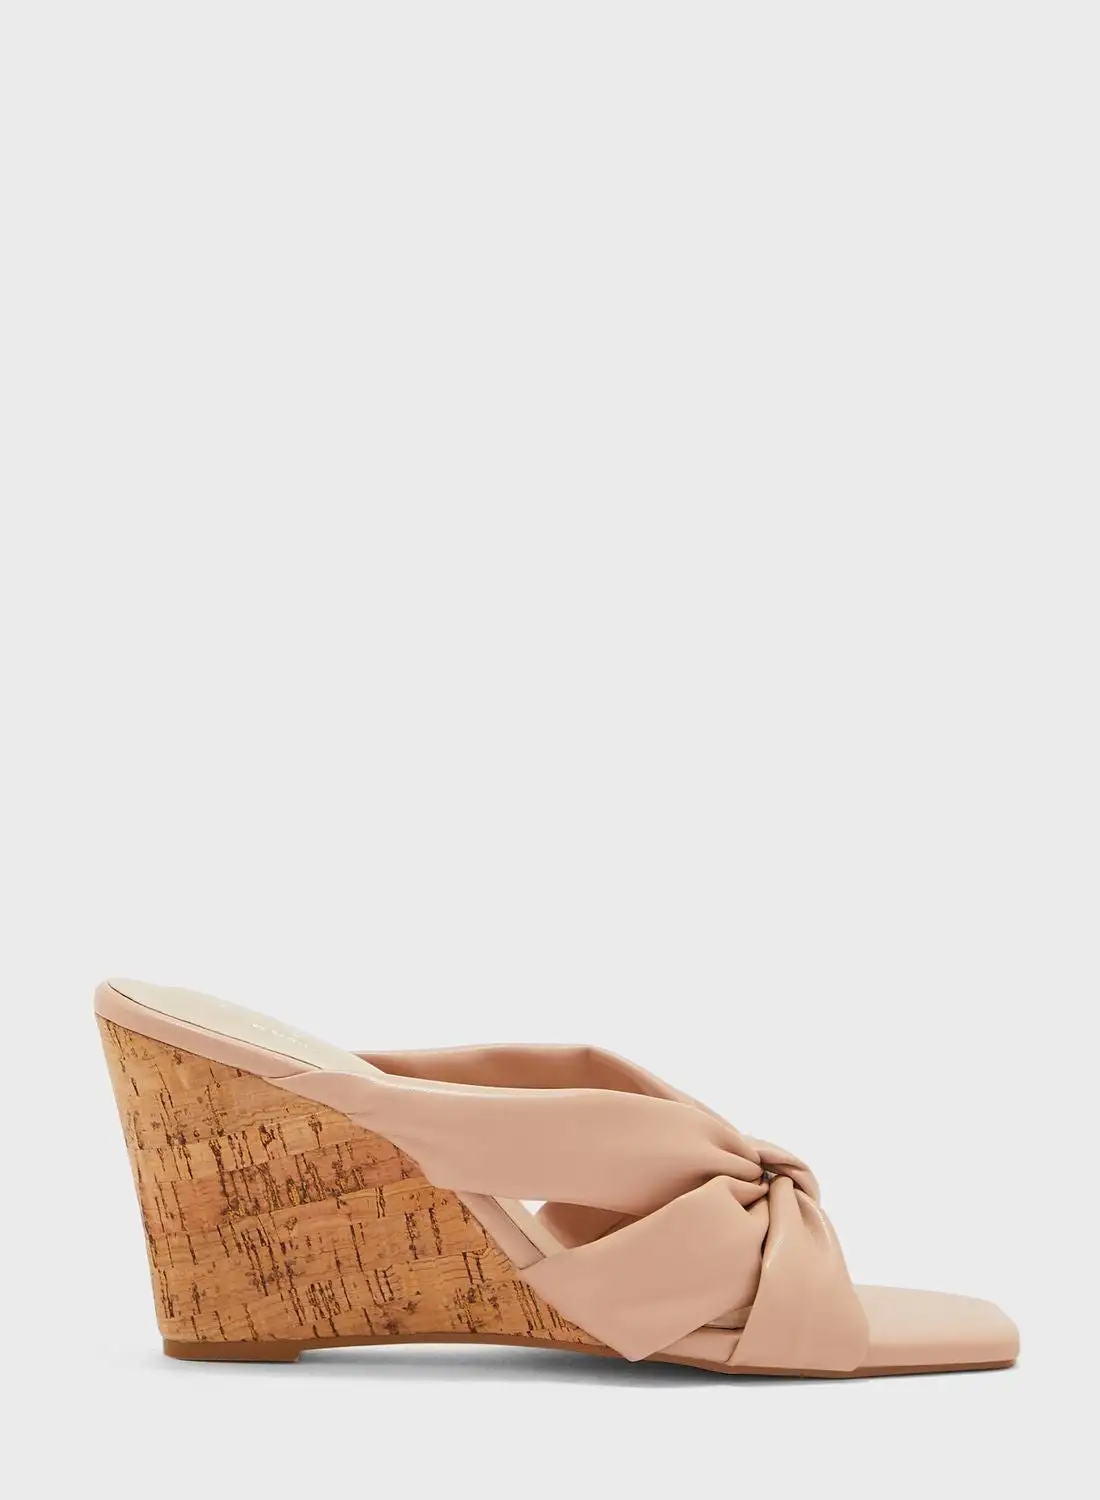 Ginger Knot-Front Leather Wedge Mules